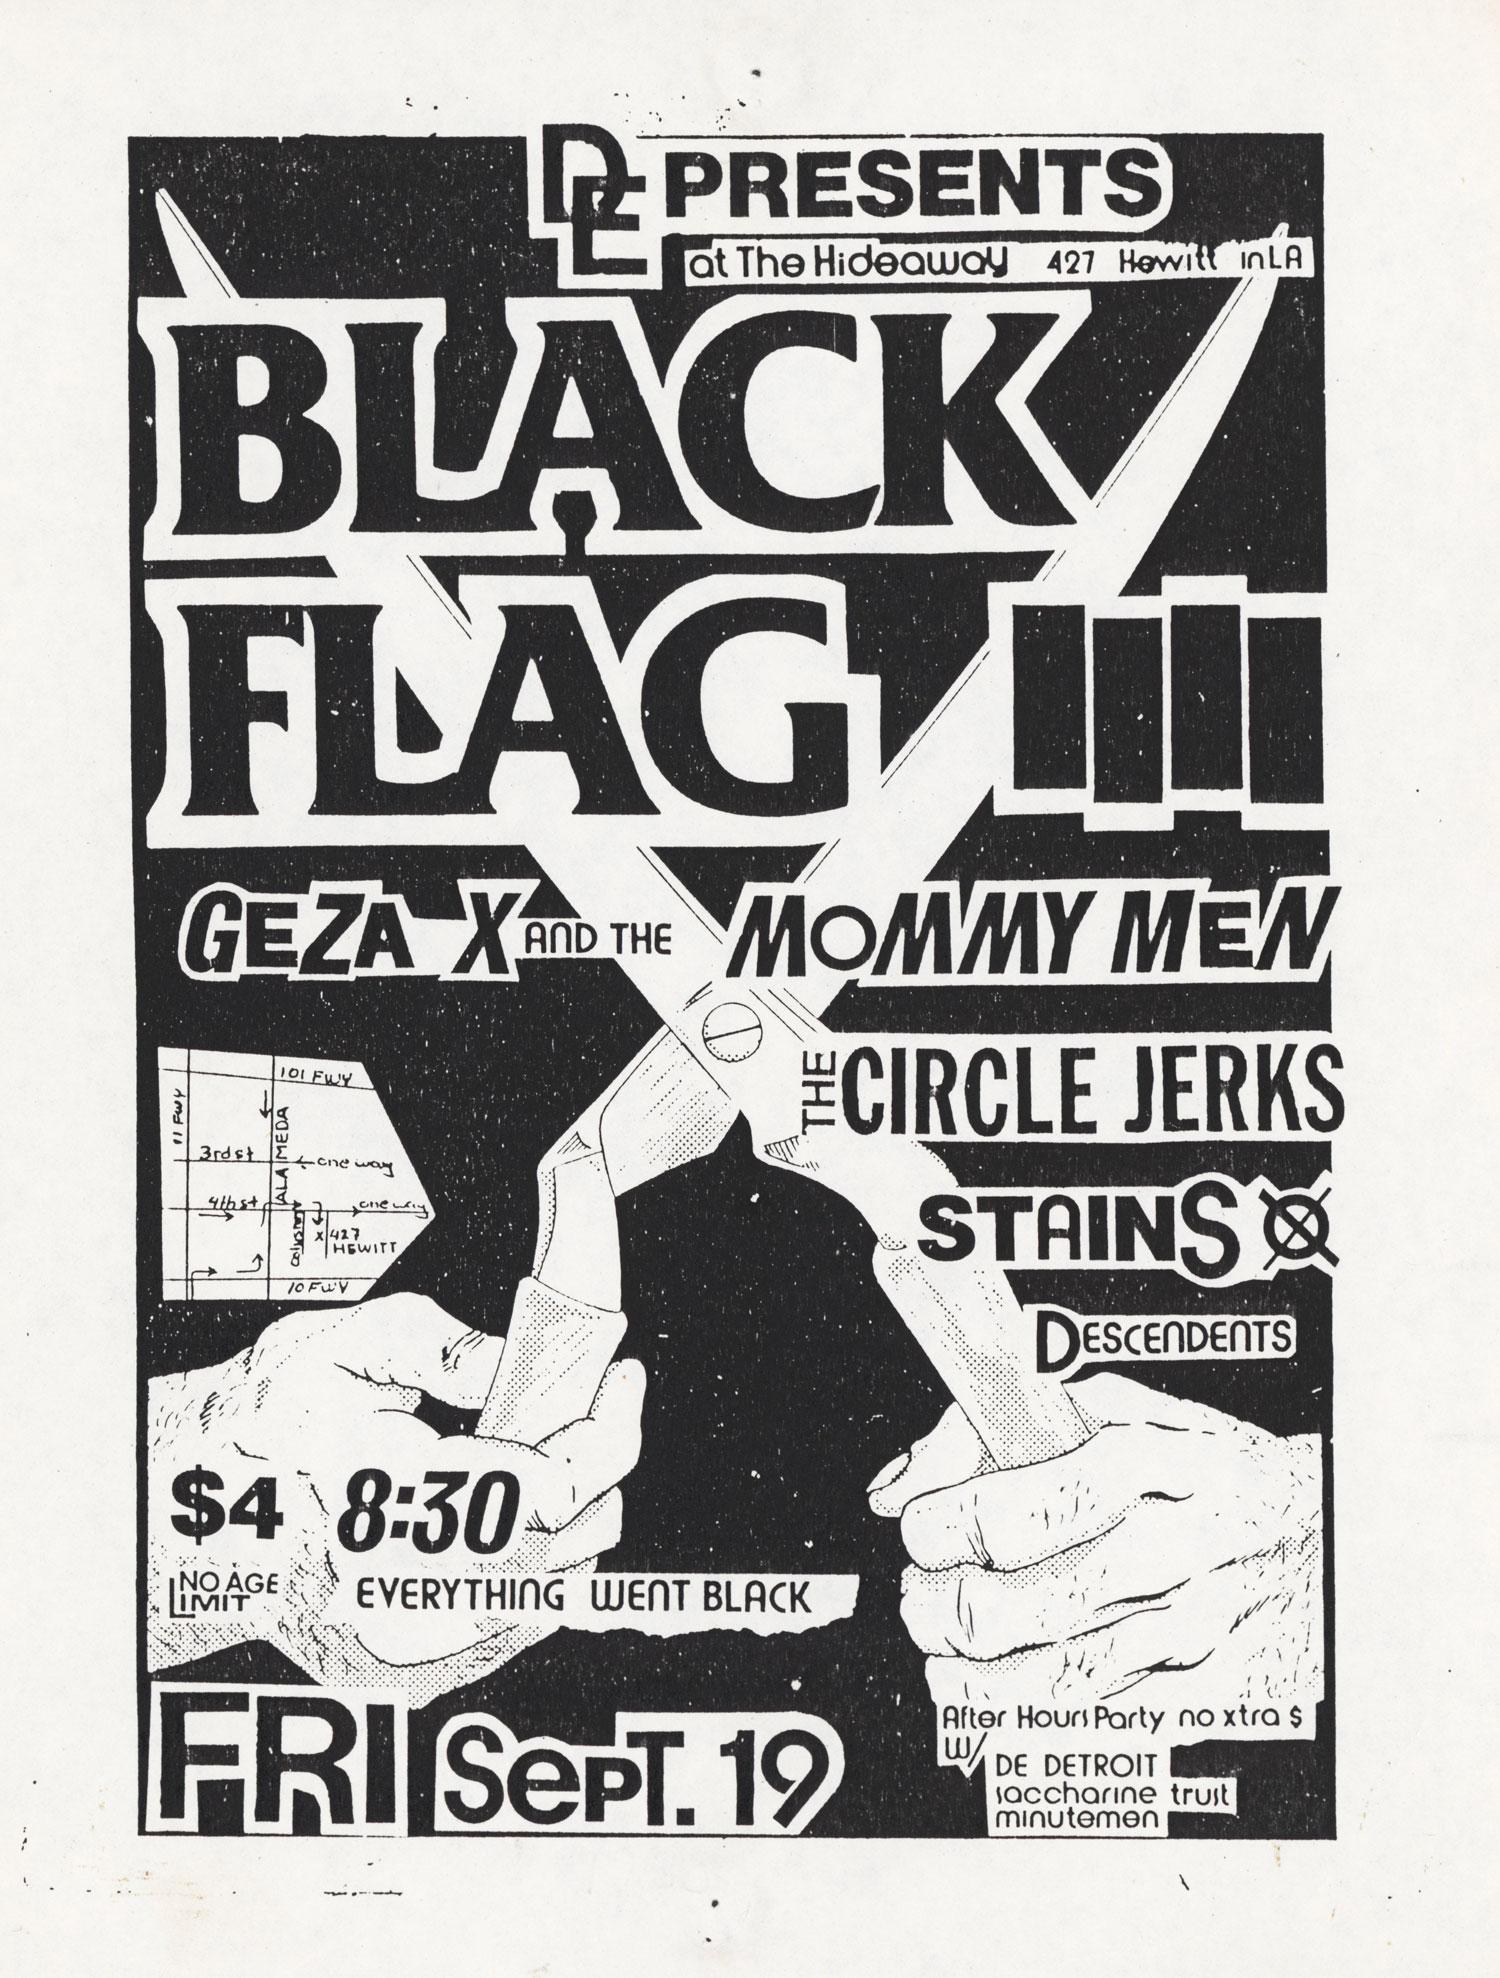 old punk flyers